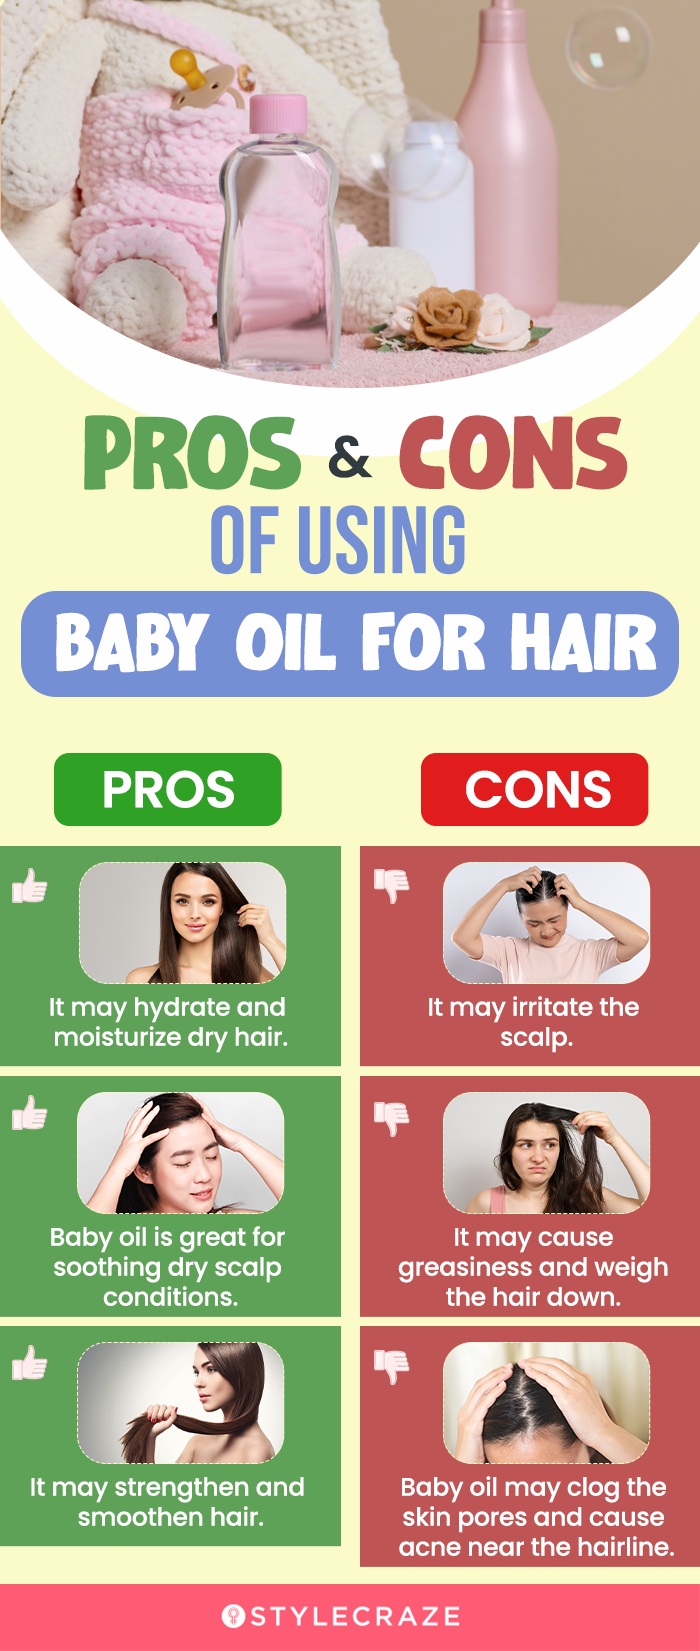 pros and cons of using baby oil for hair (infographic)